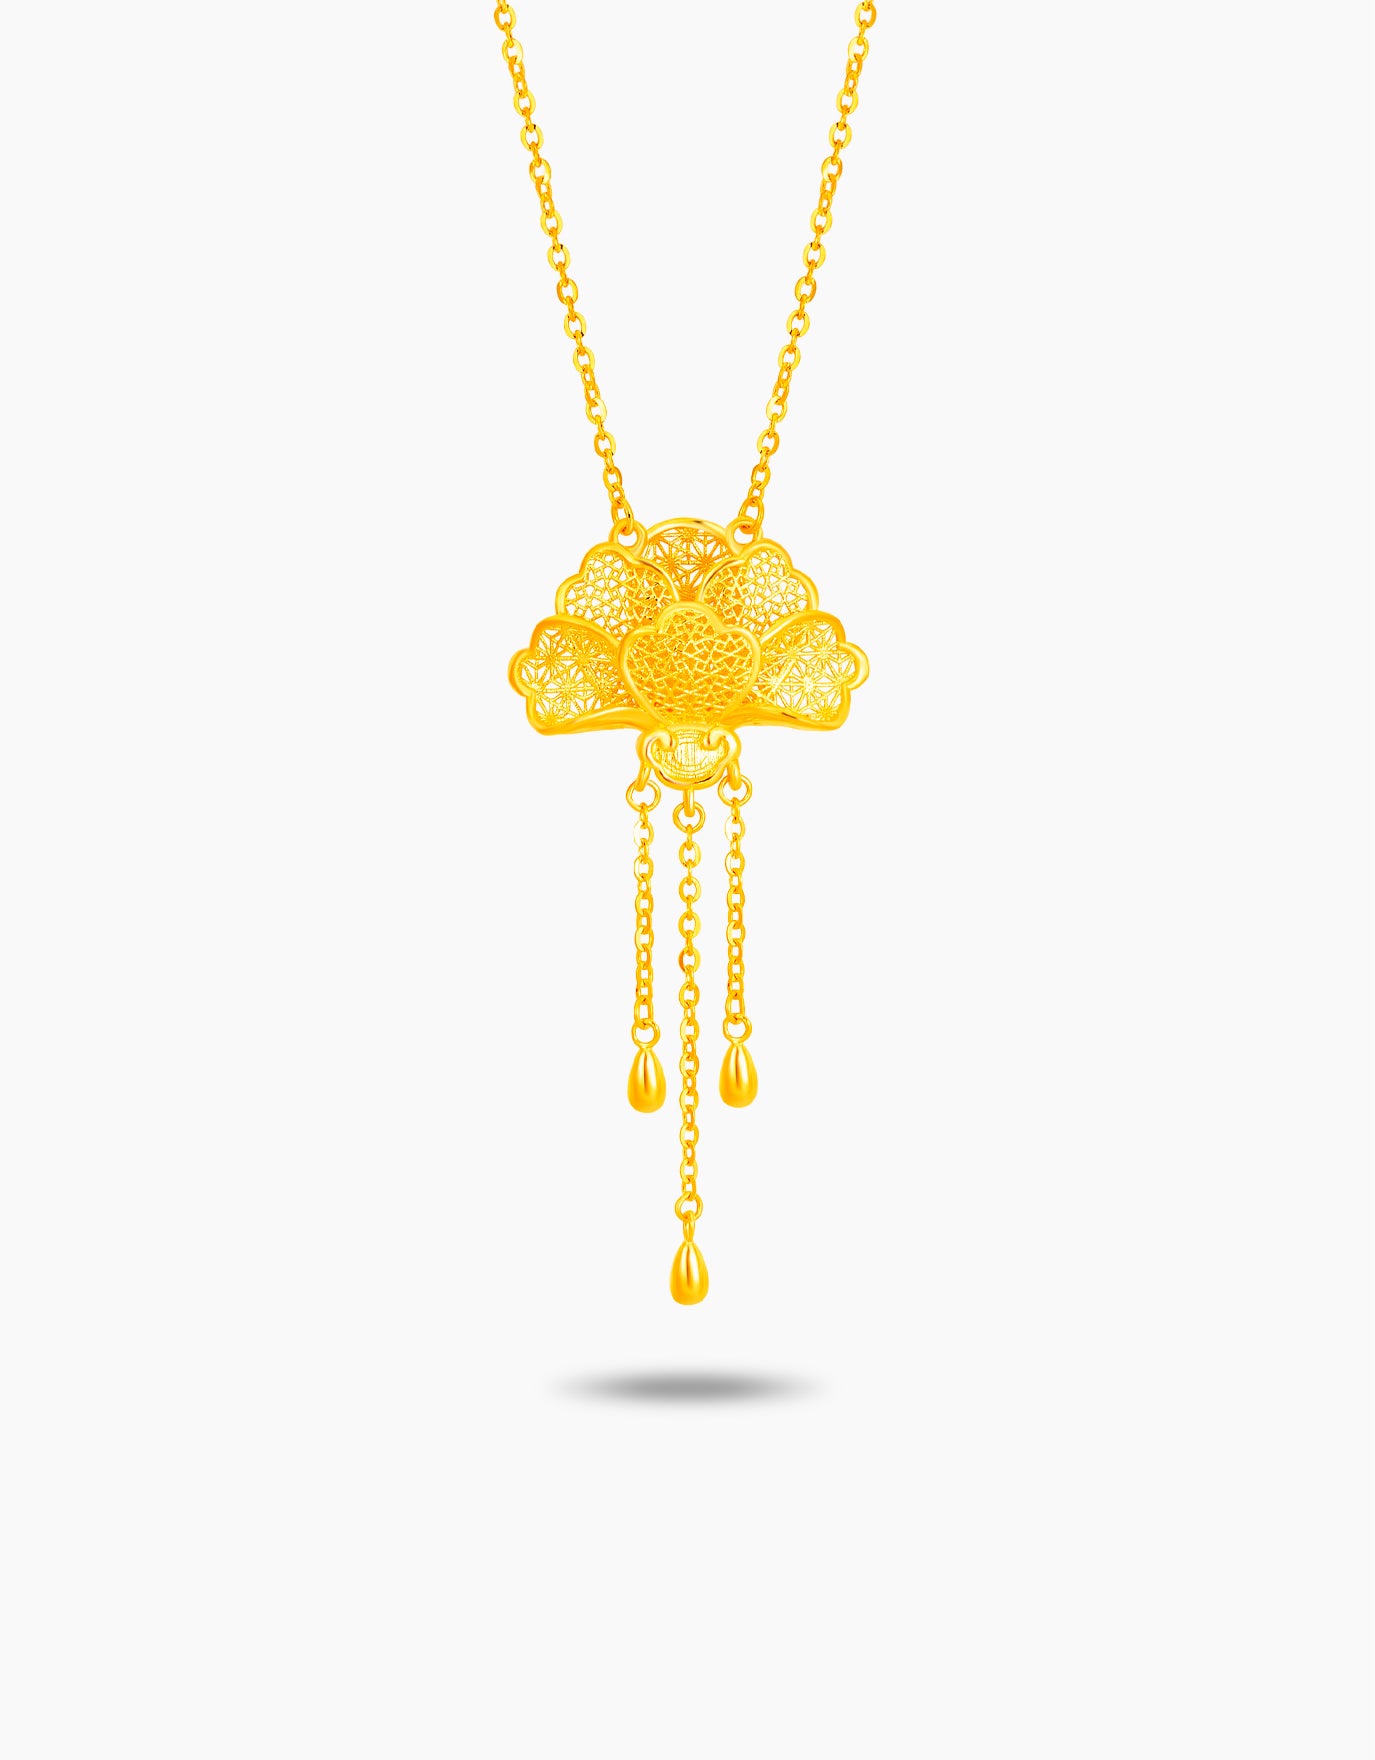 LVC 9IN Ginkgo 999 Gold Necklace